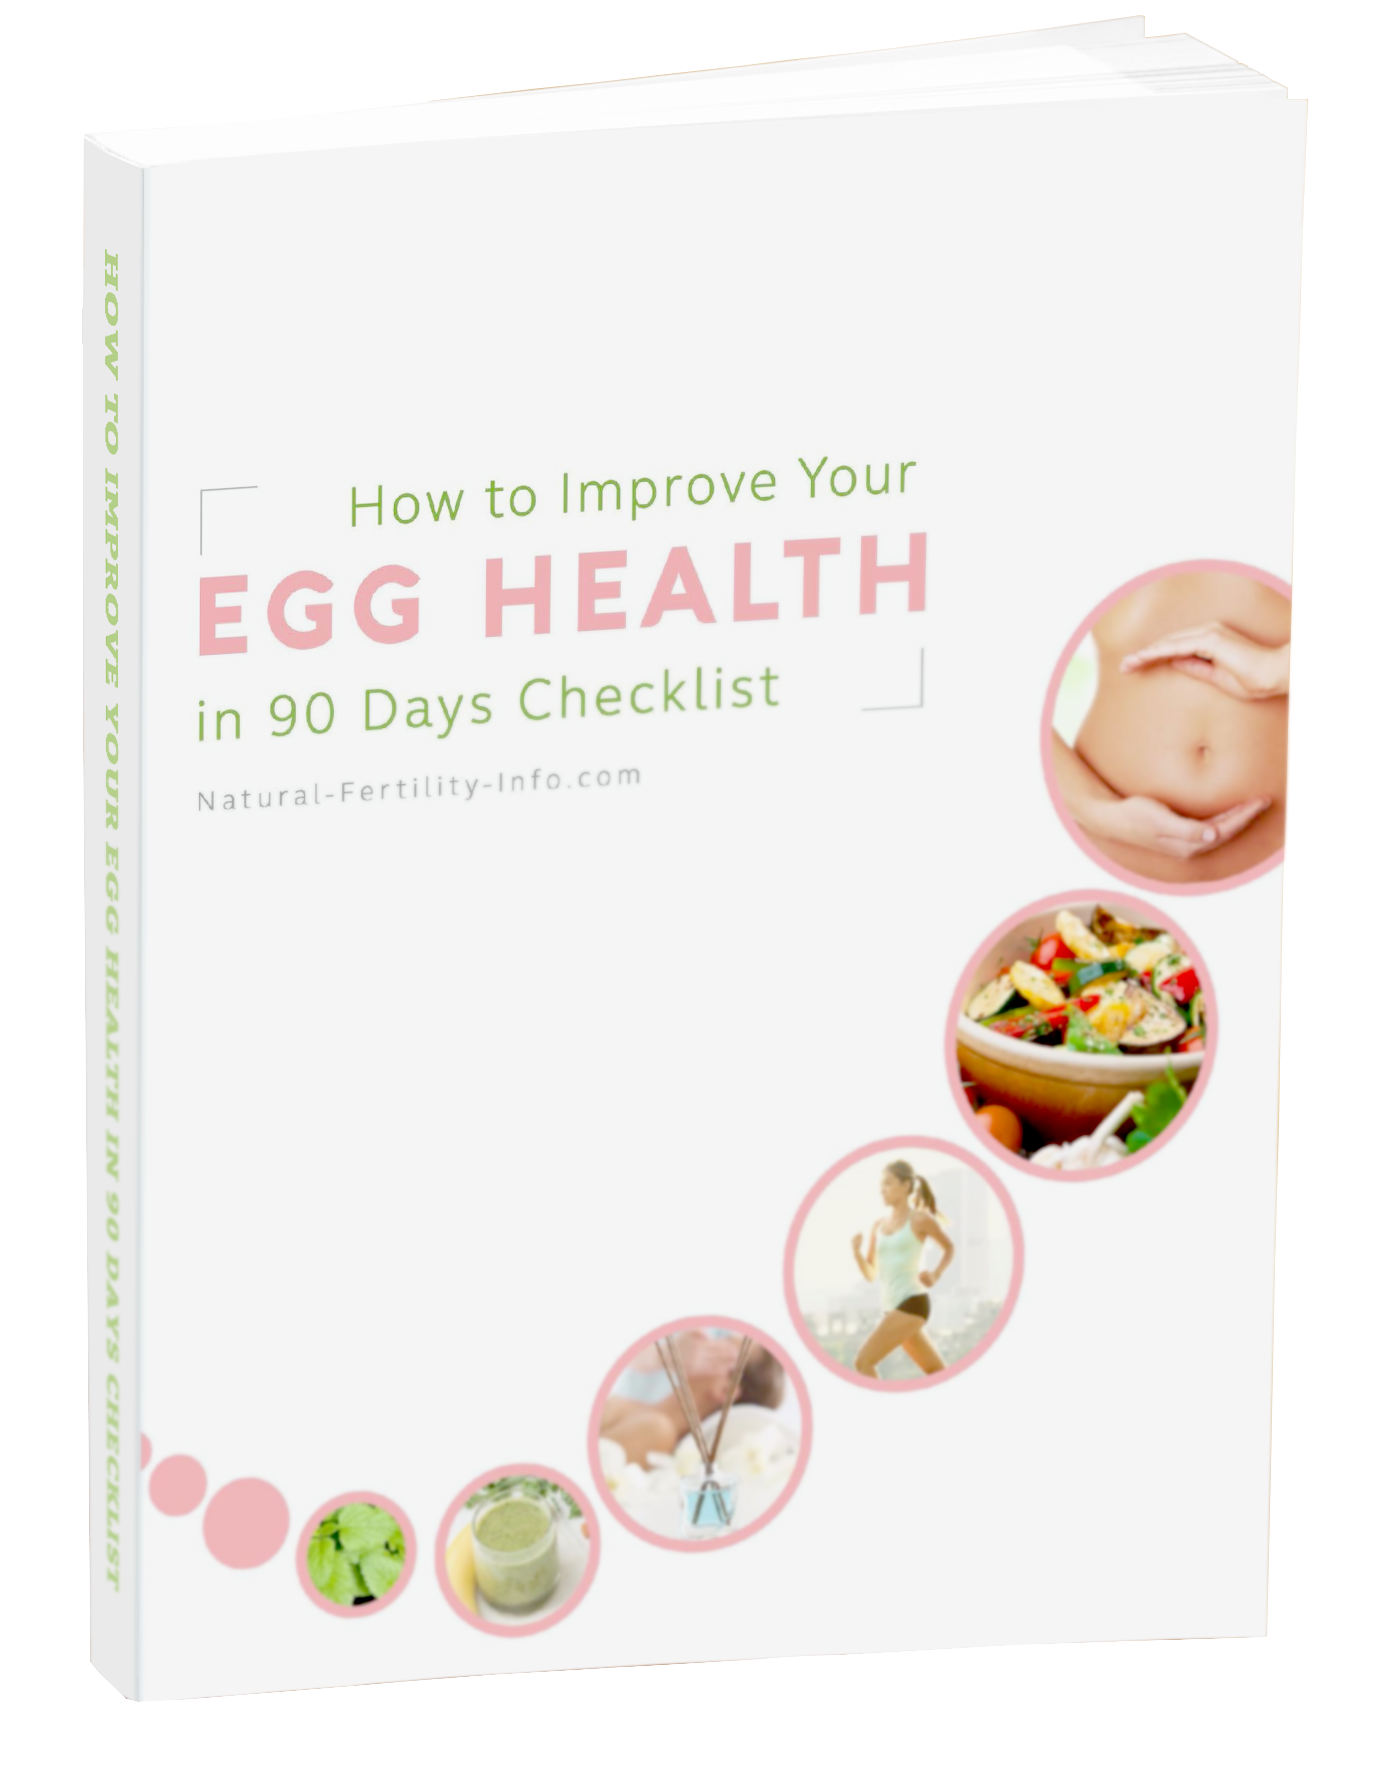 How to Improve Your Egg Health in 90 Days Checklist